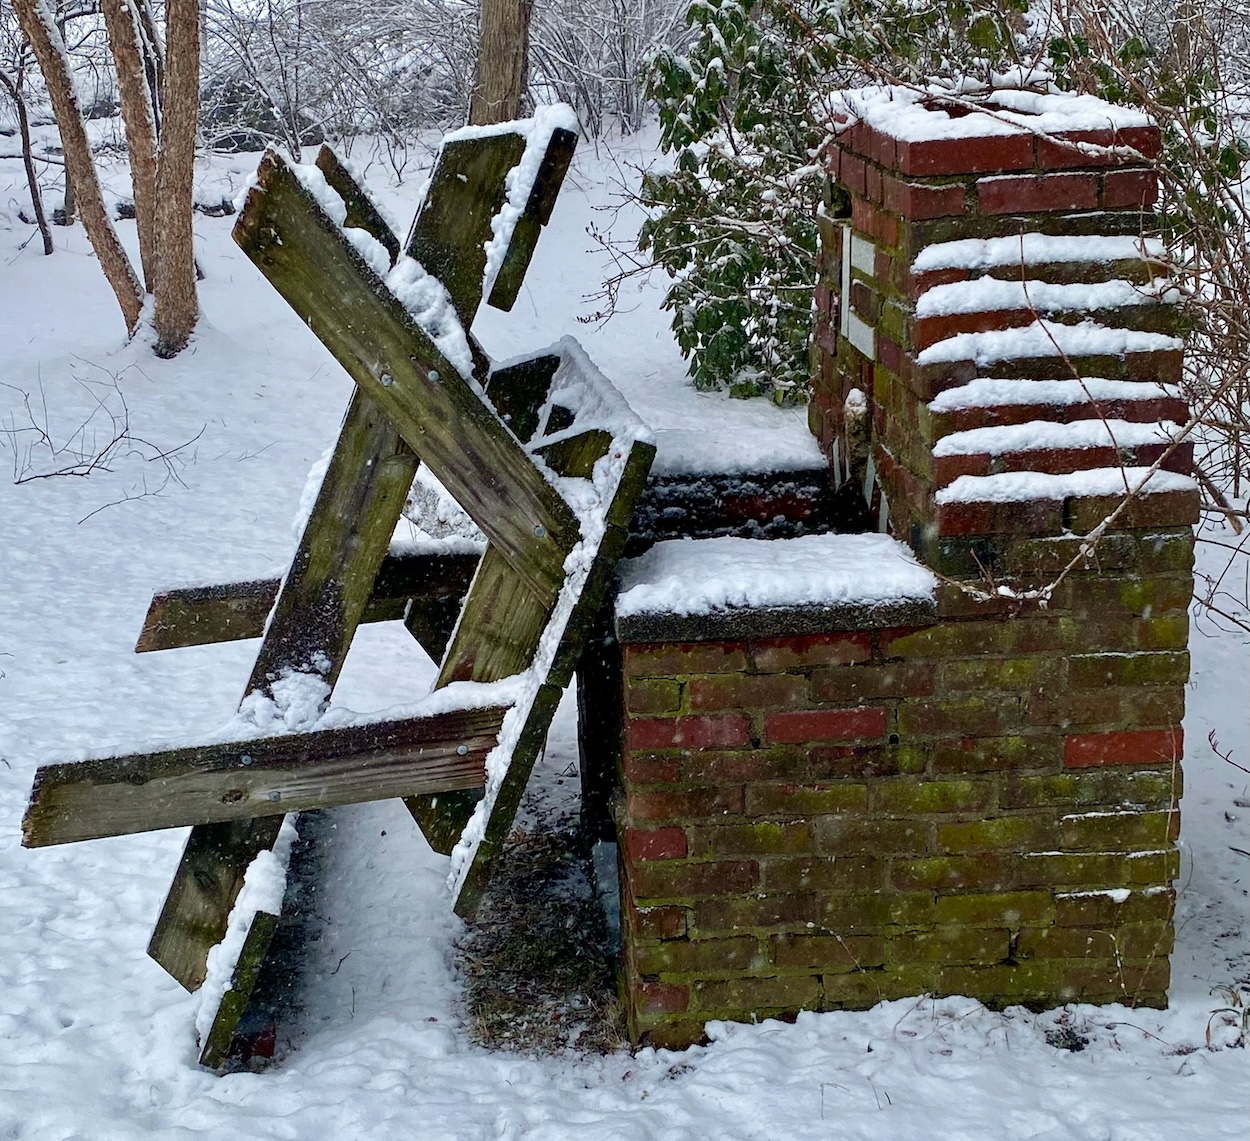 Picnic Table Leaning Against a Fireplace in the Snow